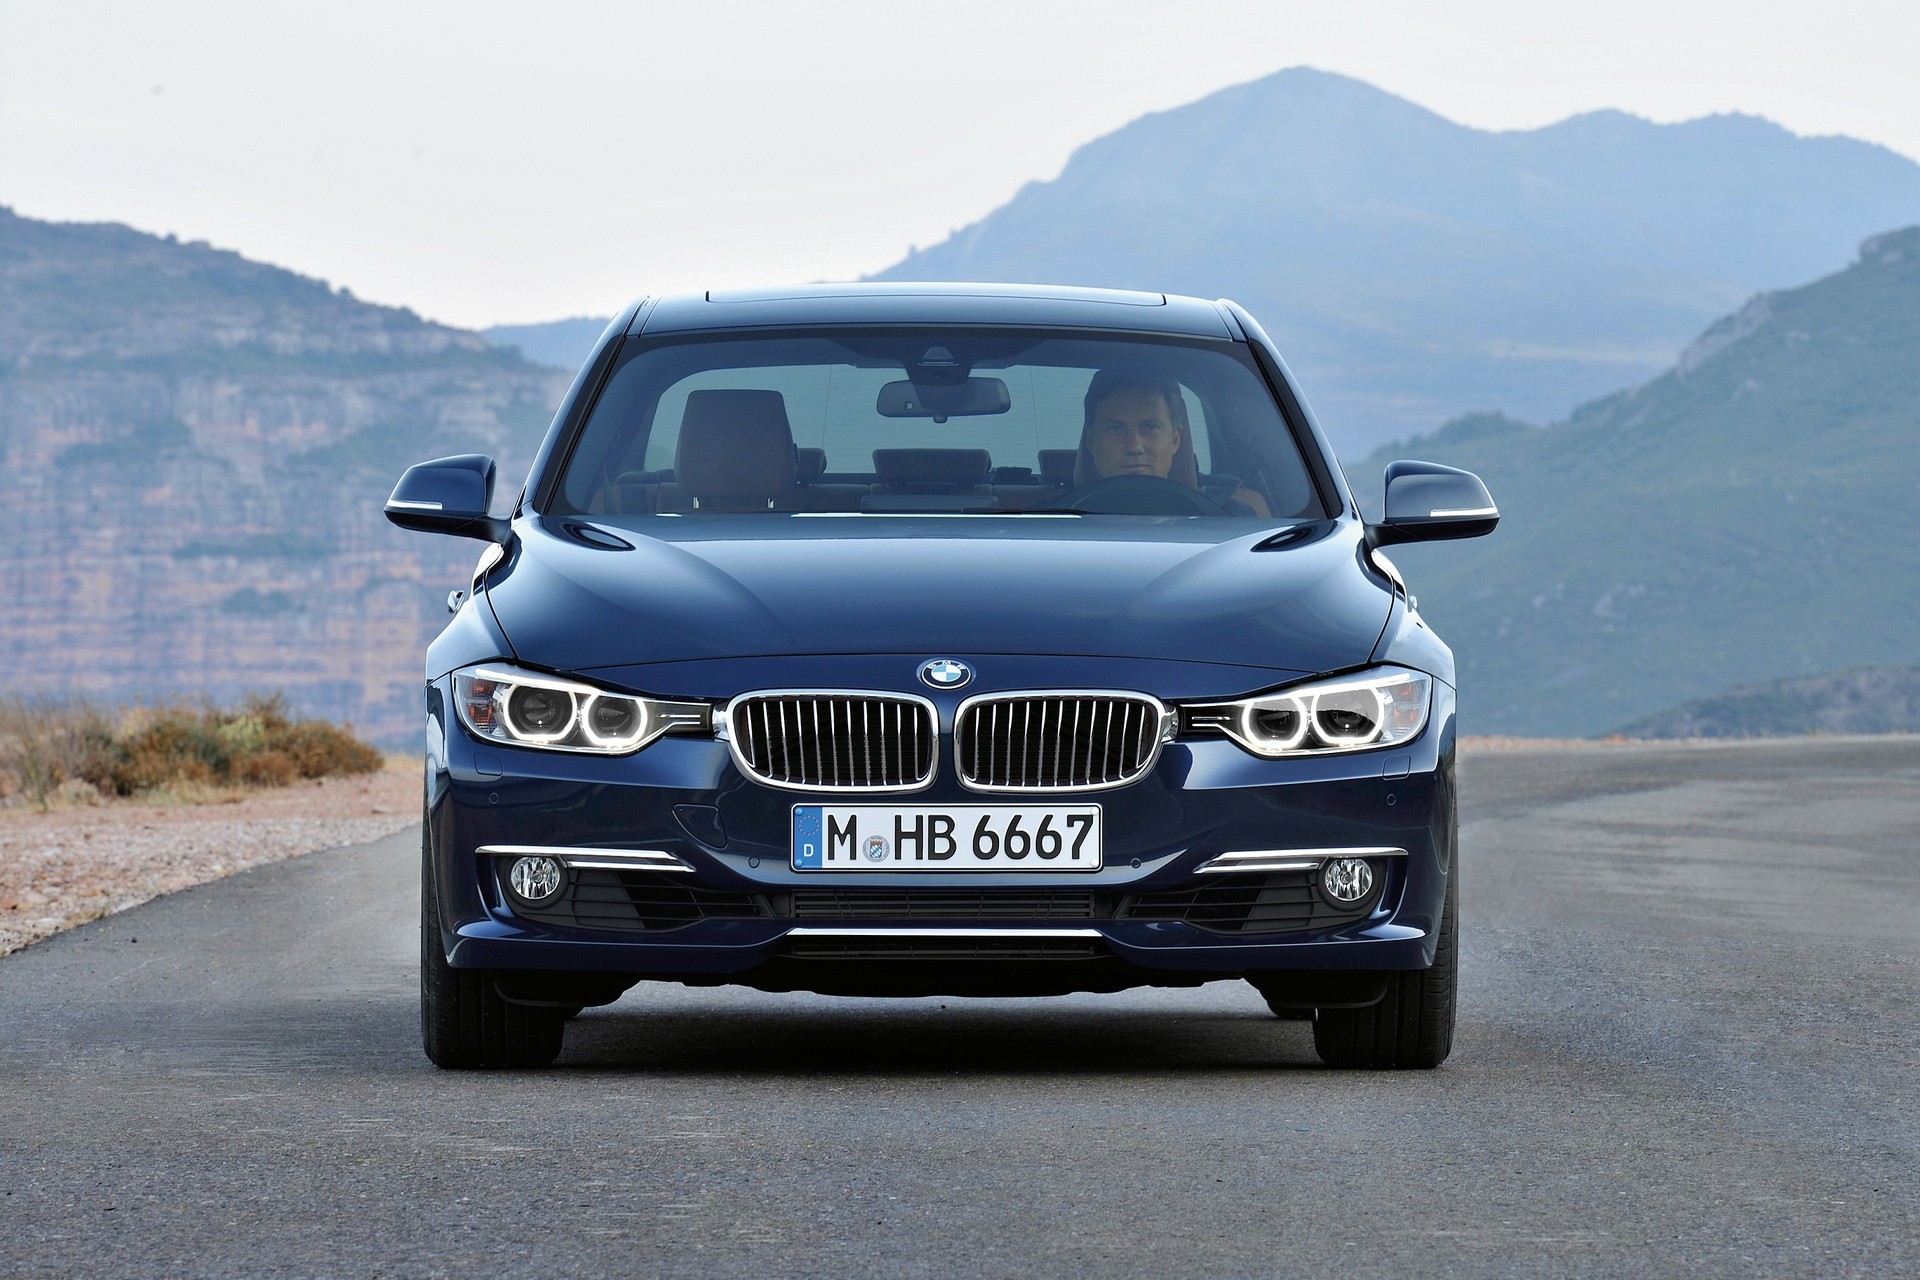 BMW Is Most Successful Luxury Car Brand In 2014 With 1.8 Million Sales